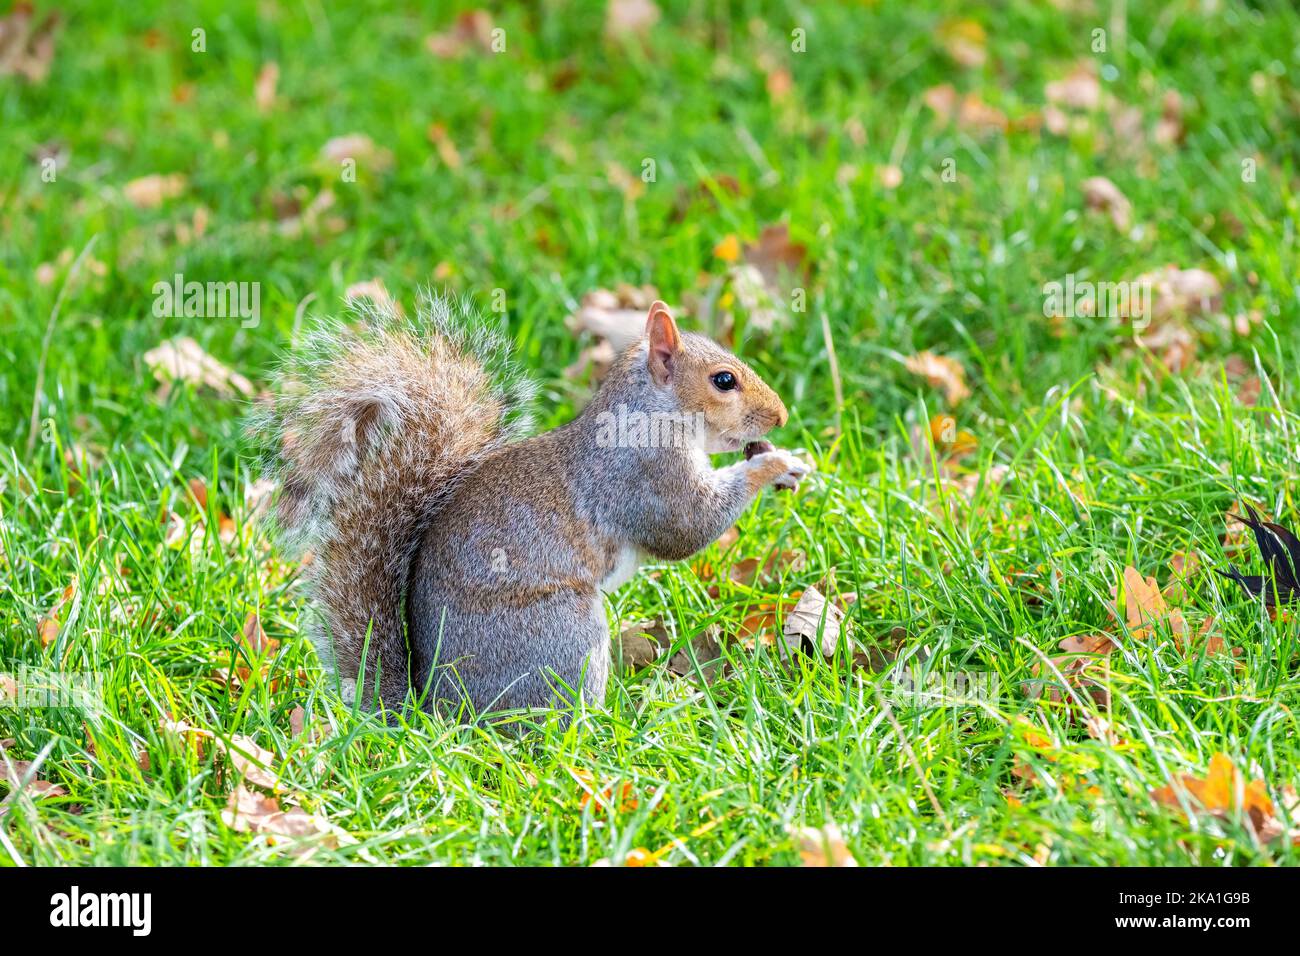 Grey squirrel sitting on a grass and eating acorn nut in Hyde Park. London, England Stock Photo